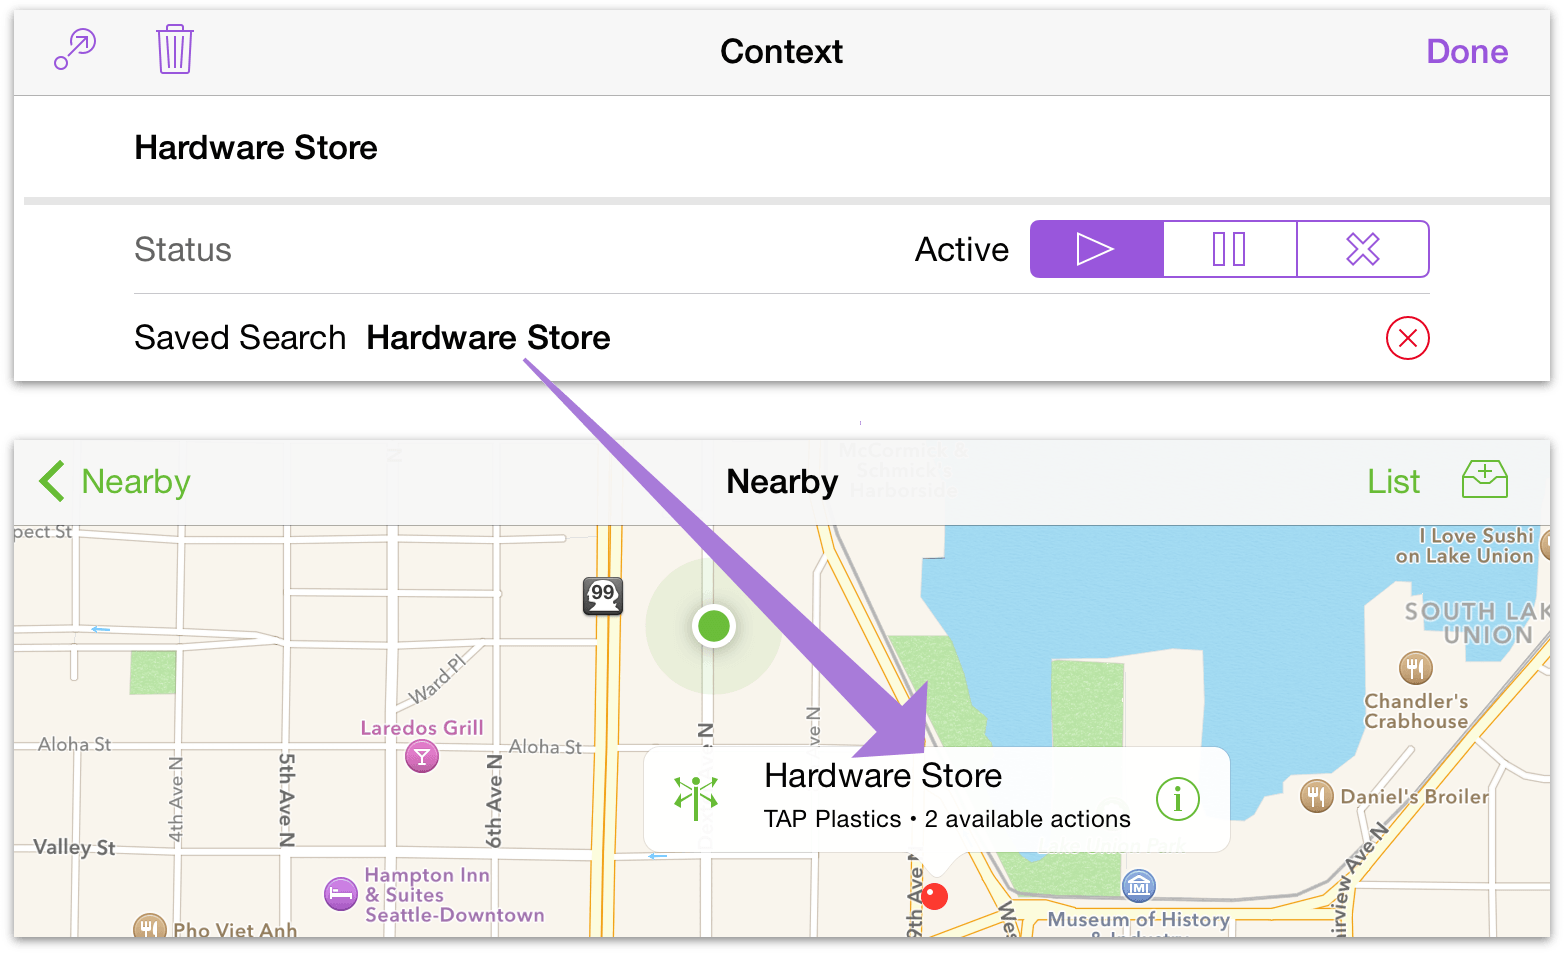 The Hardware Store context with a location search assigned, and how it appears in the Nearby perspective's map.